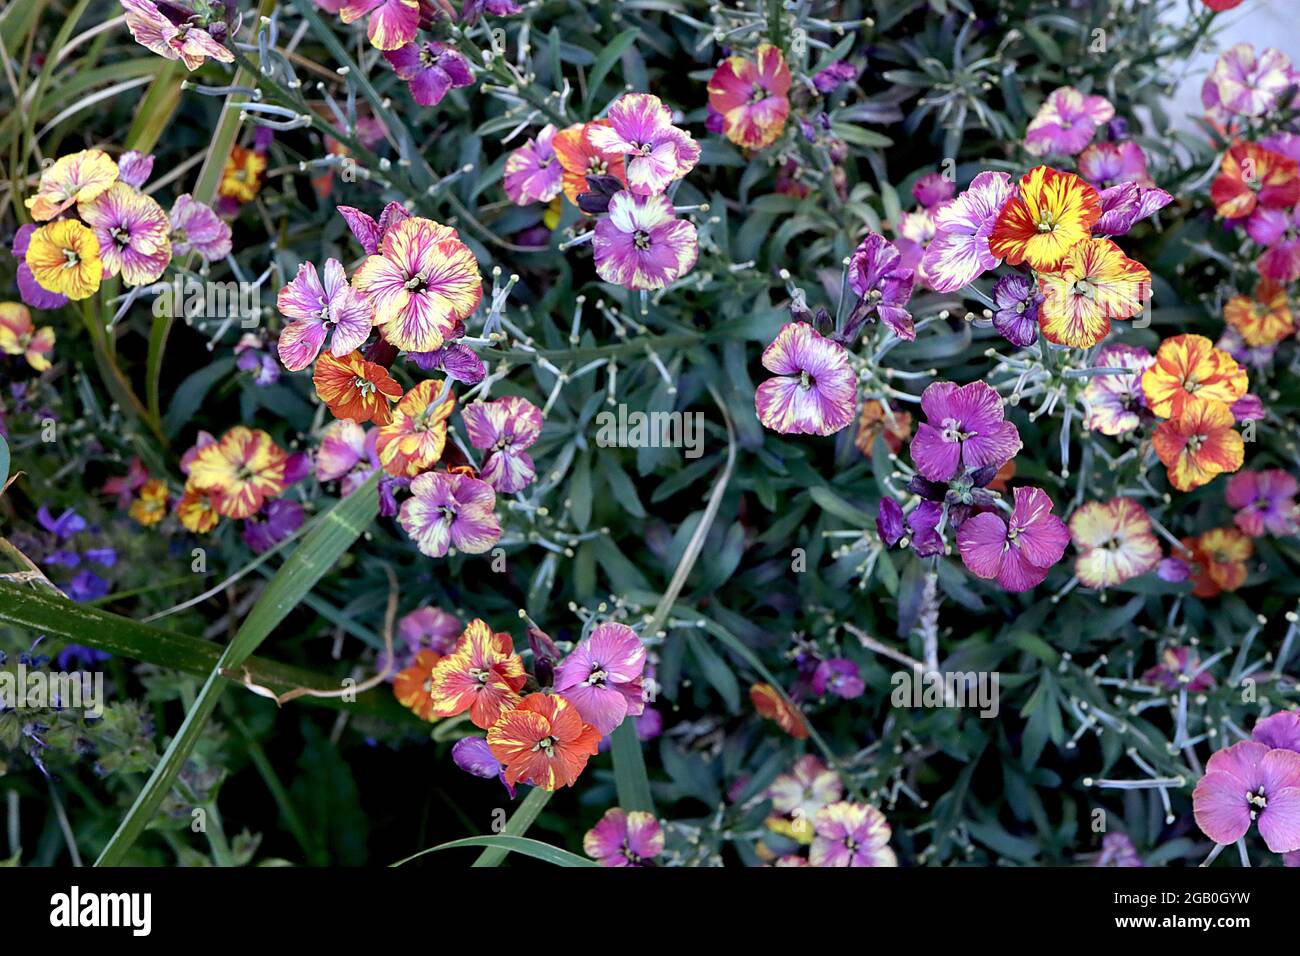 Erysimum cheiri / Wallflower ‘Monet’s Moment’ and ‘Constant Cheer’ Marbled flowers with purple, white, red and yellow streaks,  June, England, UK Stock Photo